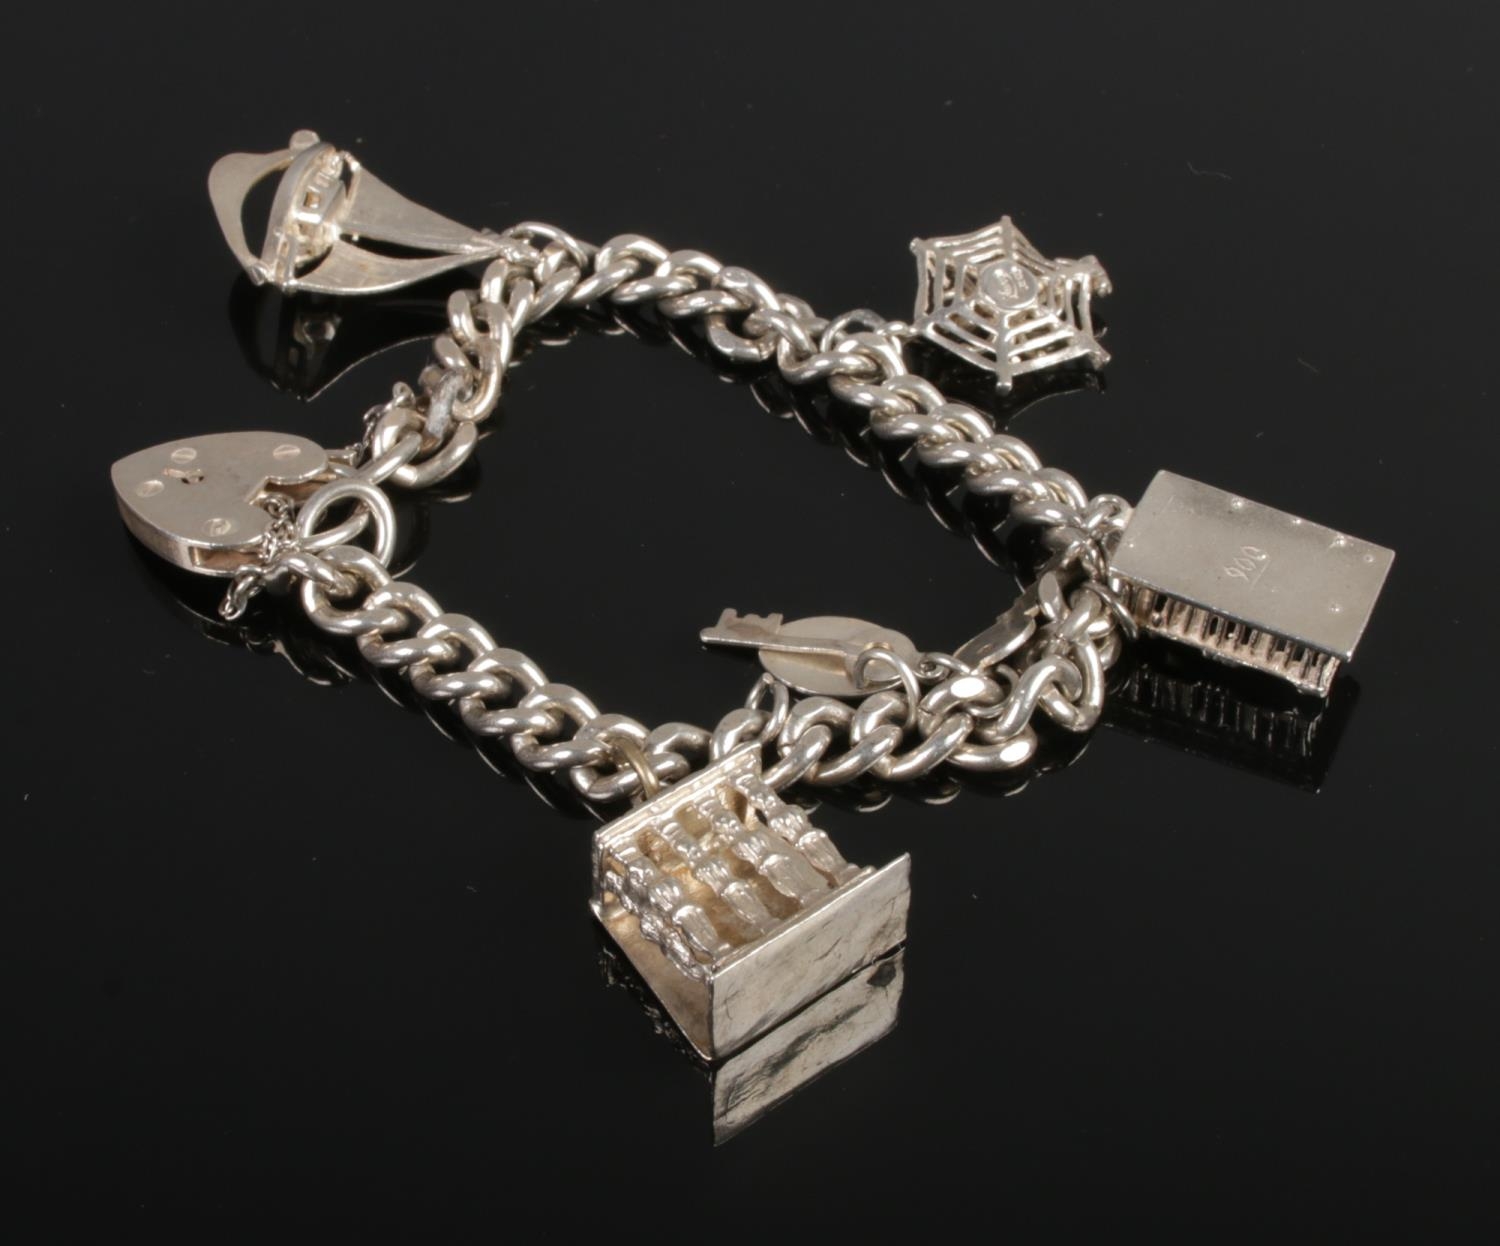 A silver and white metal charm bracelet, on hallmarked silver chain. Contains six charms including